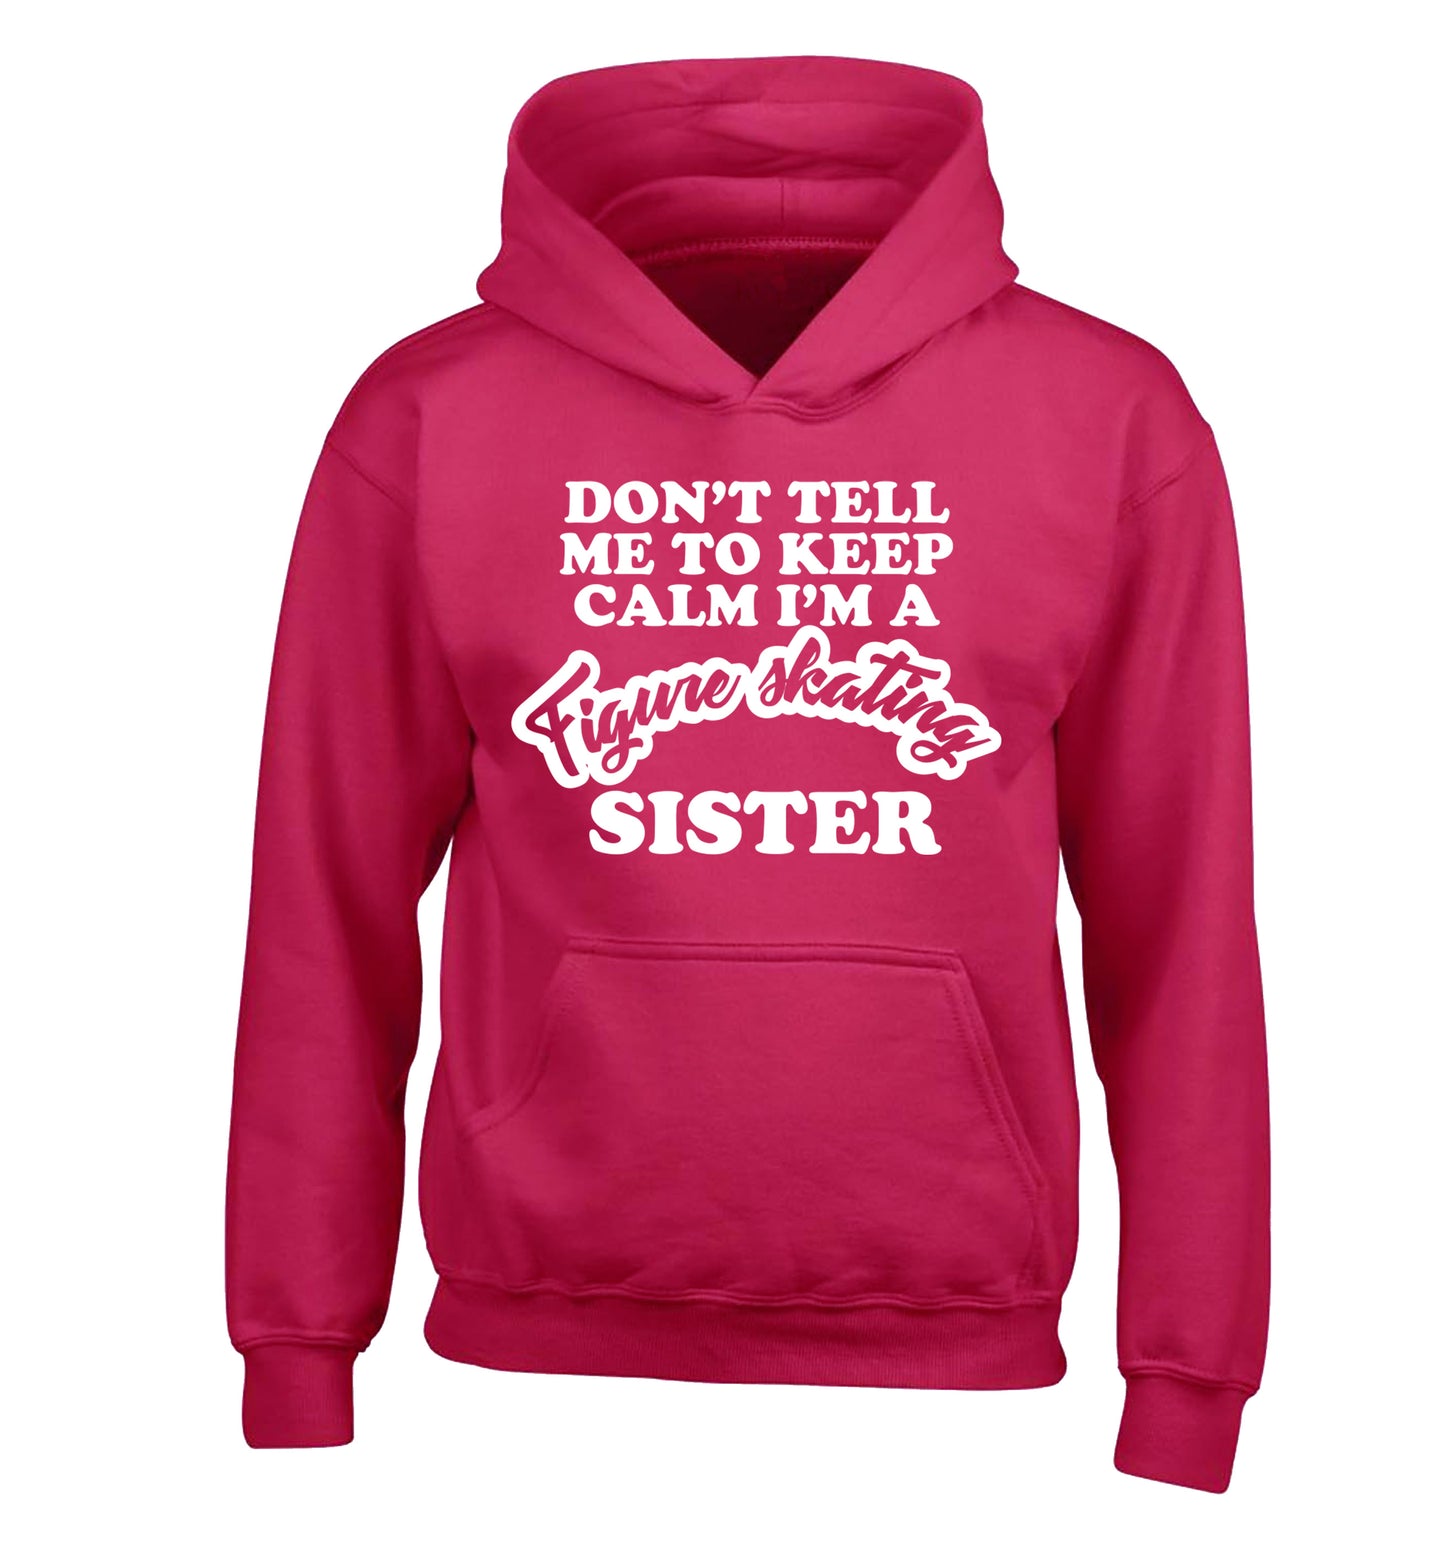 Don't tell me to keep calm I'm a figure skating sister children's pink hoodie 12-14 Years